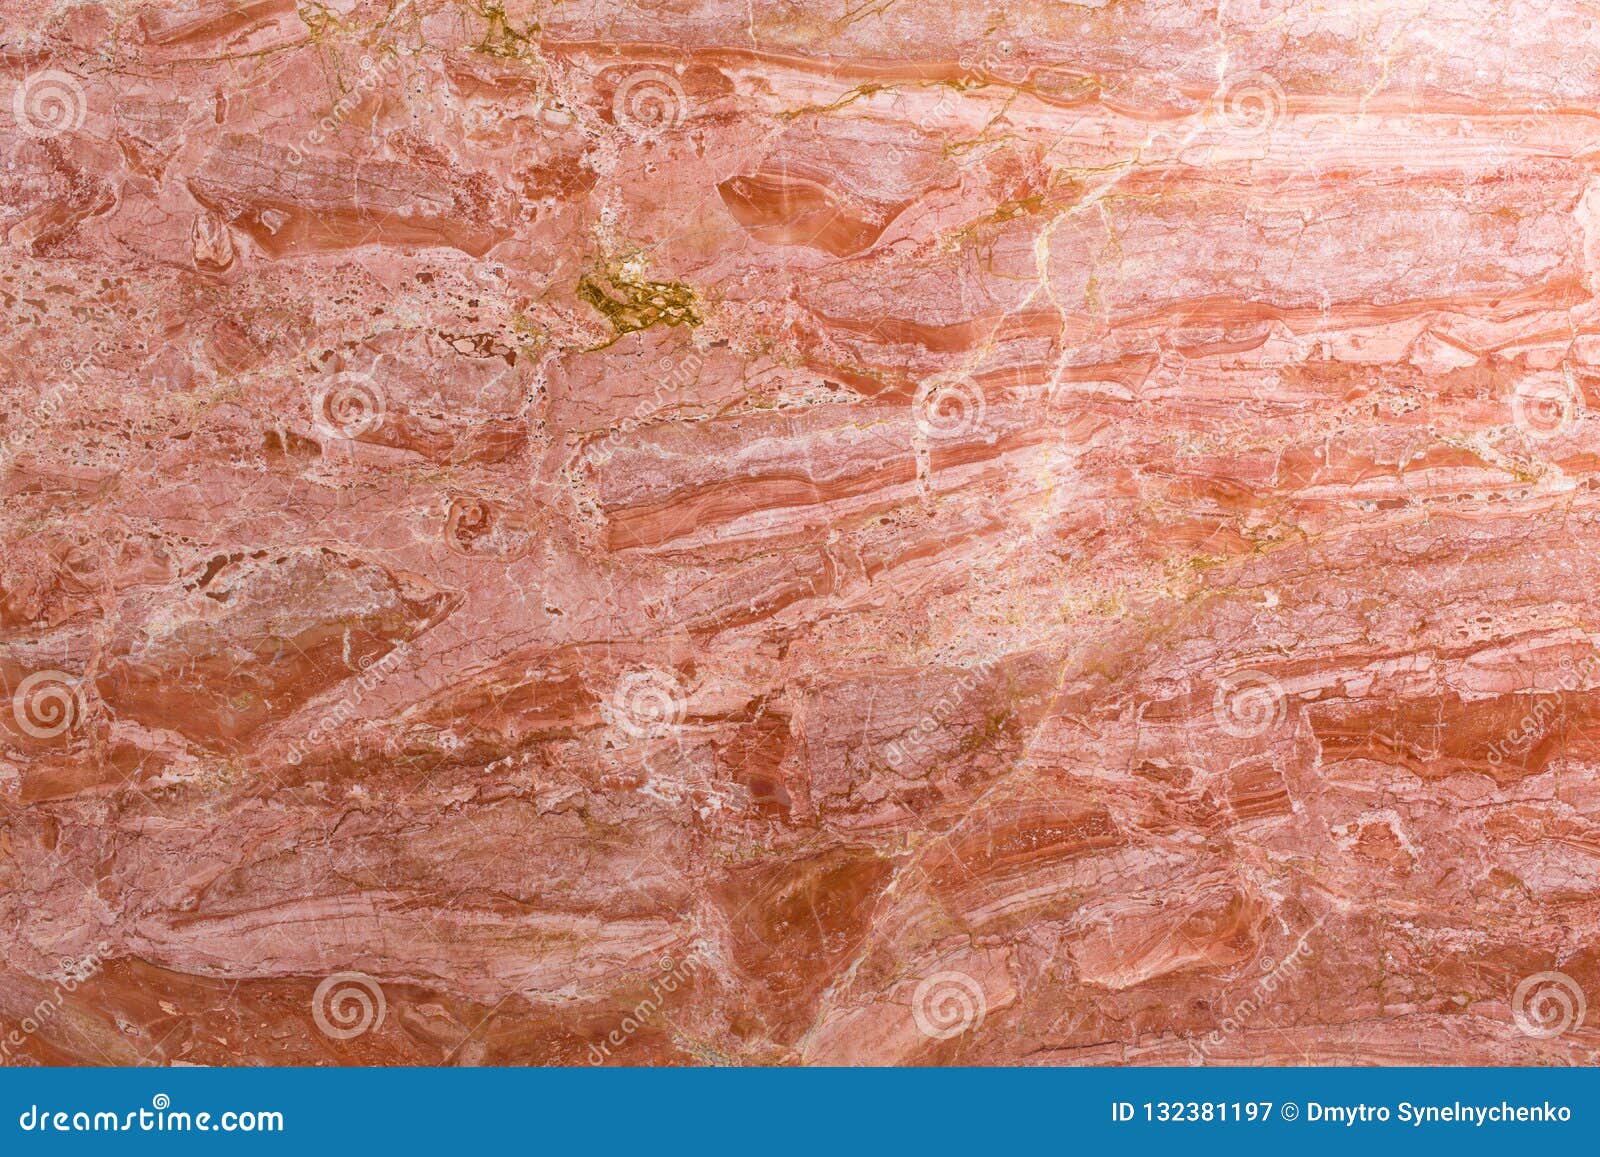 Red Marble Texture In Natural Pattern With High Resolution For